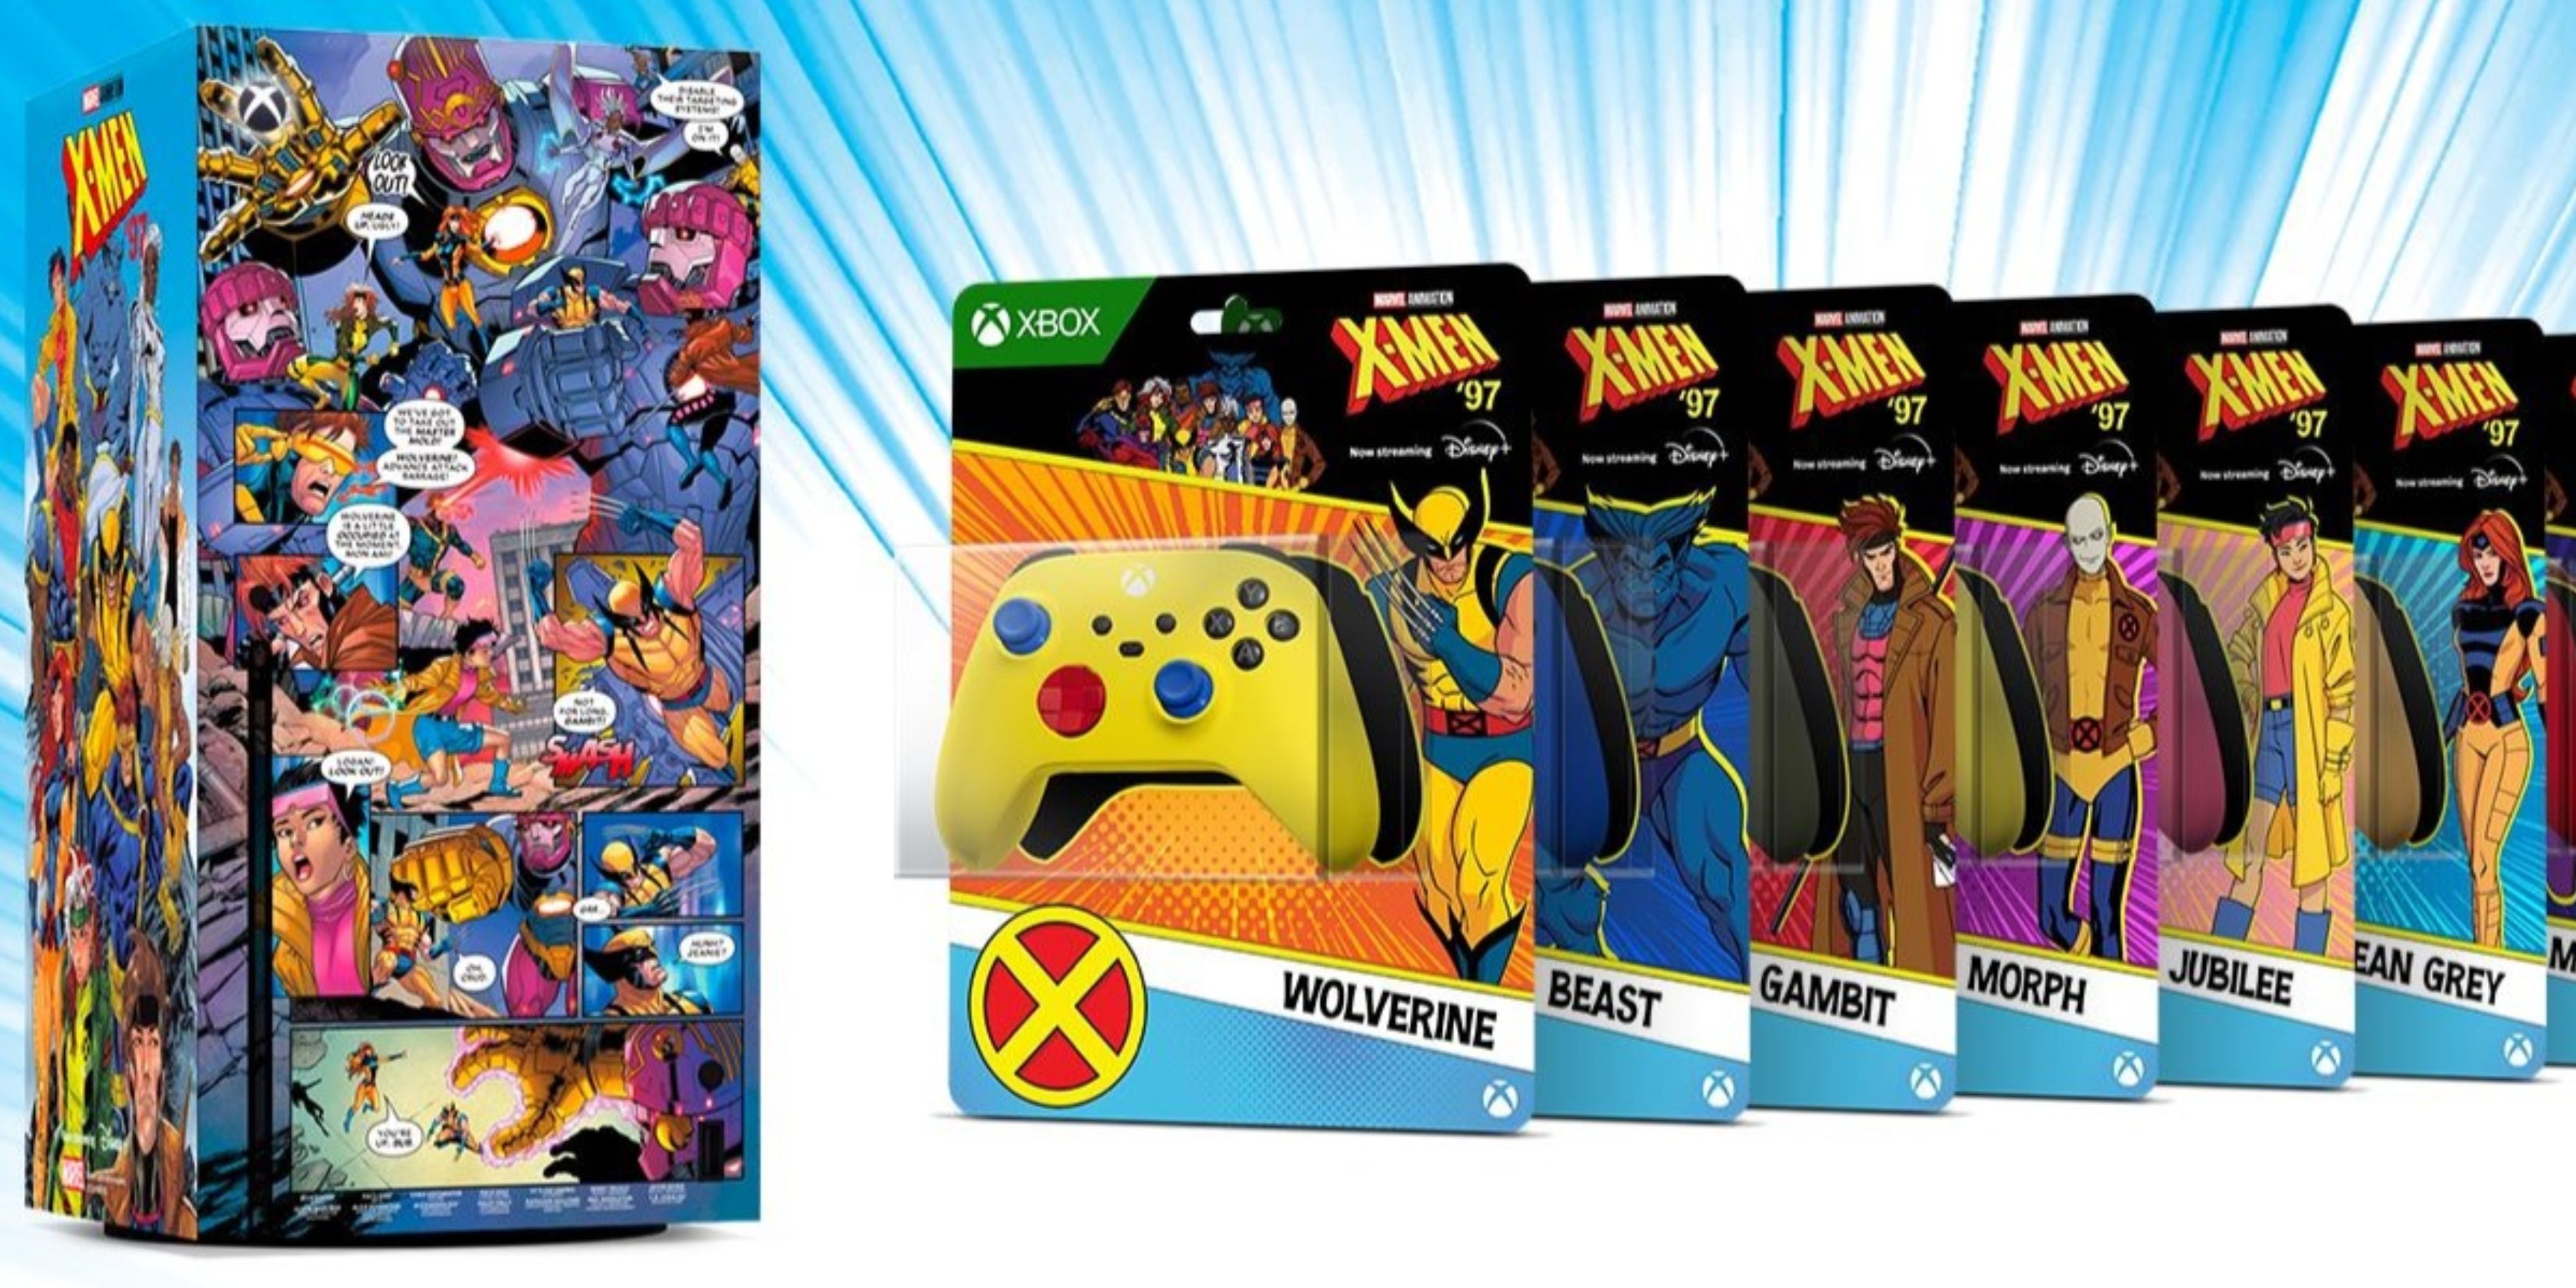 x-men '97 xbox series x and matching controllers